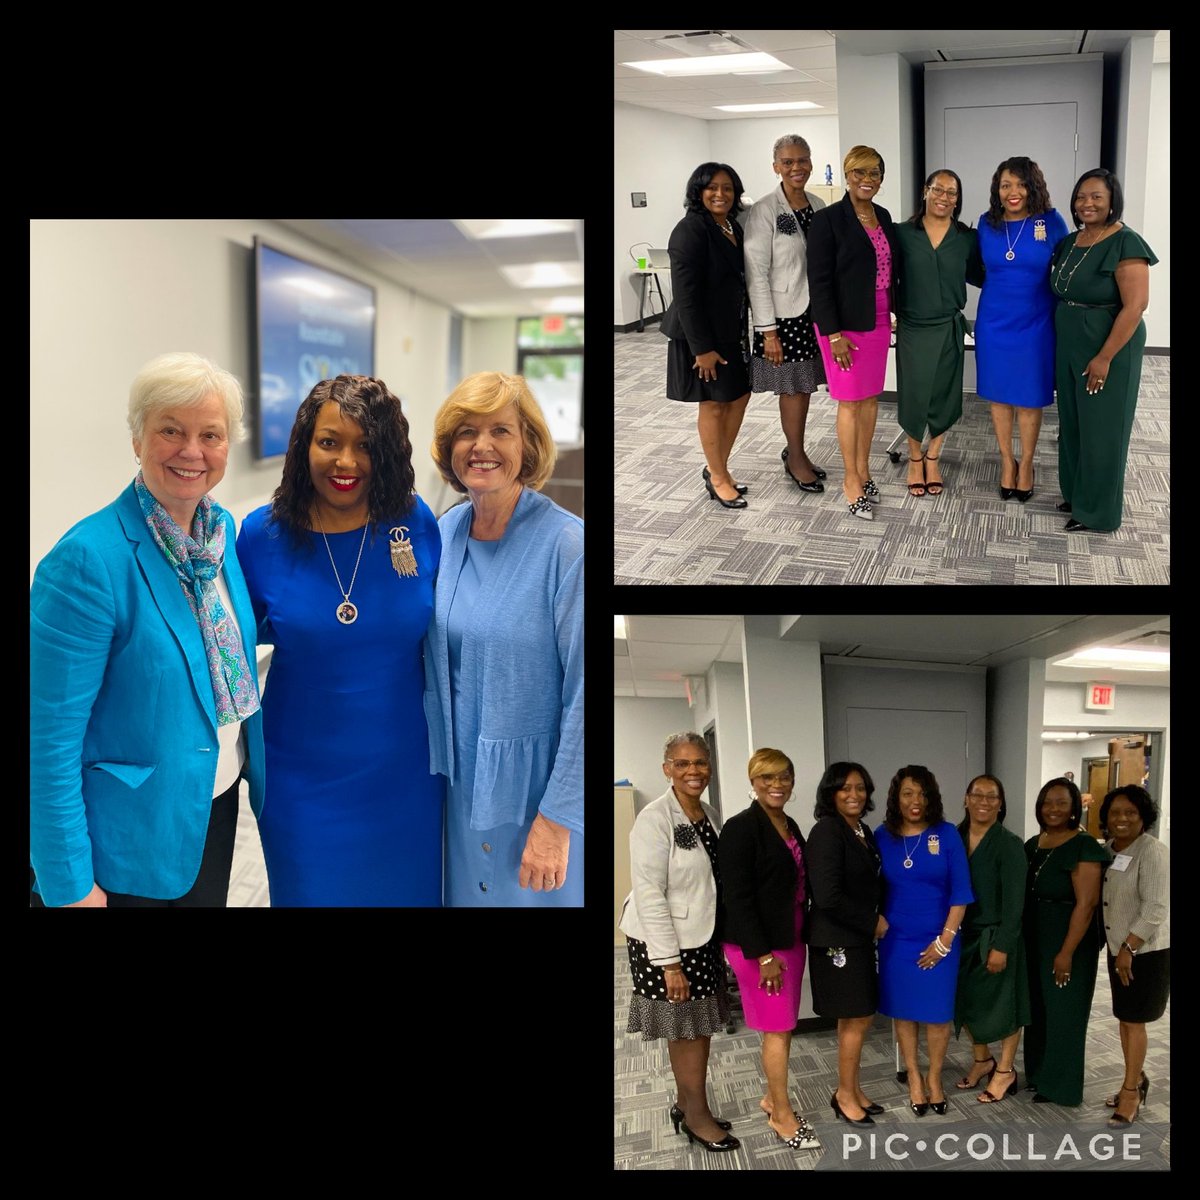 Congratulations to @DrMarcellaShaw, superintendent of @29Williston in Barnwell County for being named the 2023 South Carolina Superintendent of the Year! So Proud of you! @SCASAnews @Molly_Spearman @SCASAExec @AmecaThomas @CaveVallerie #LeadershipMatters #SisterSupes